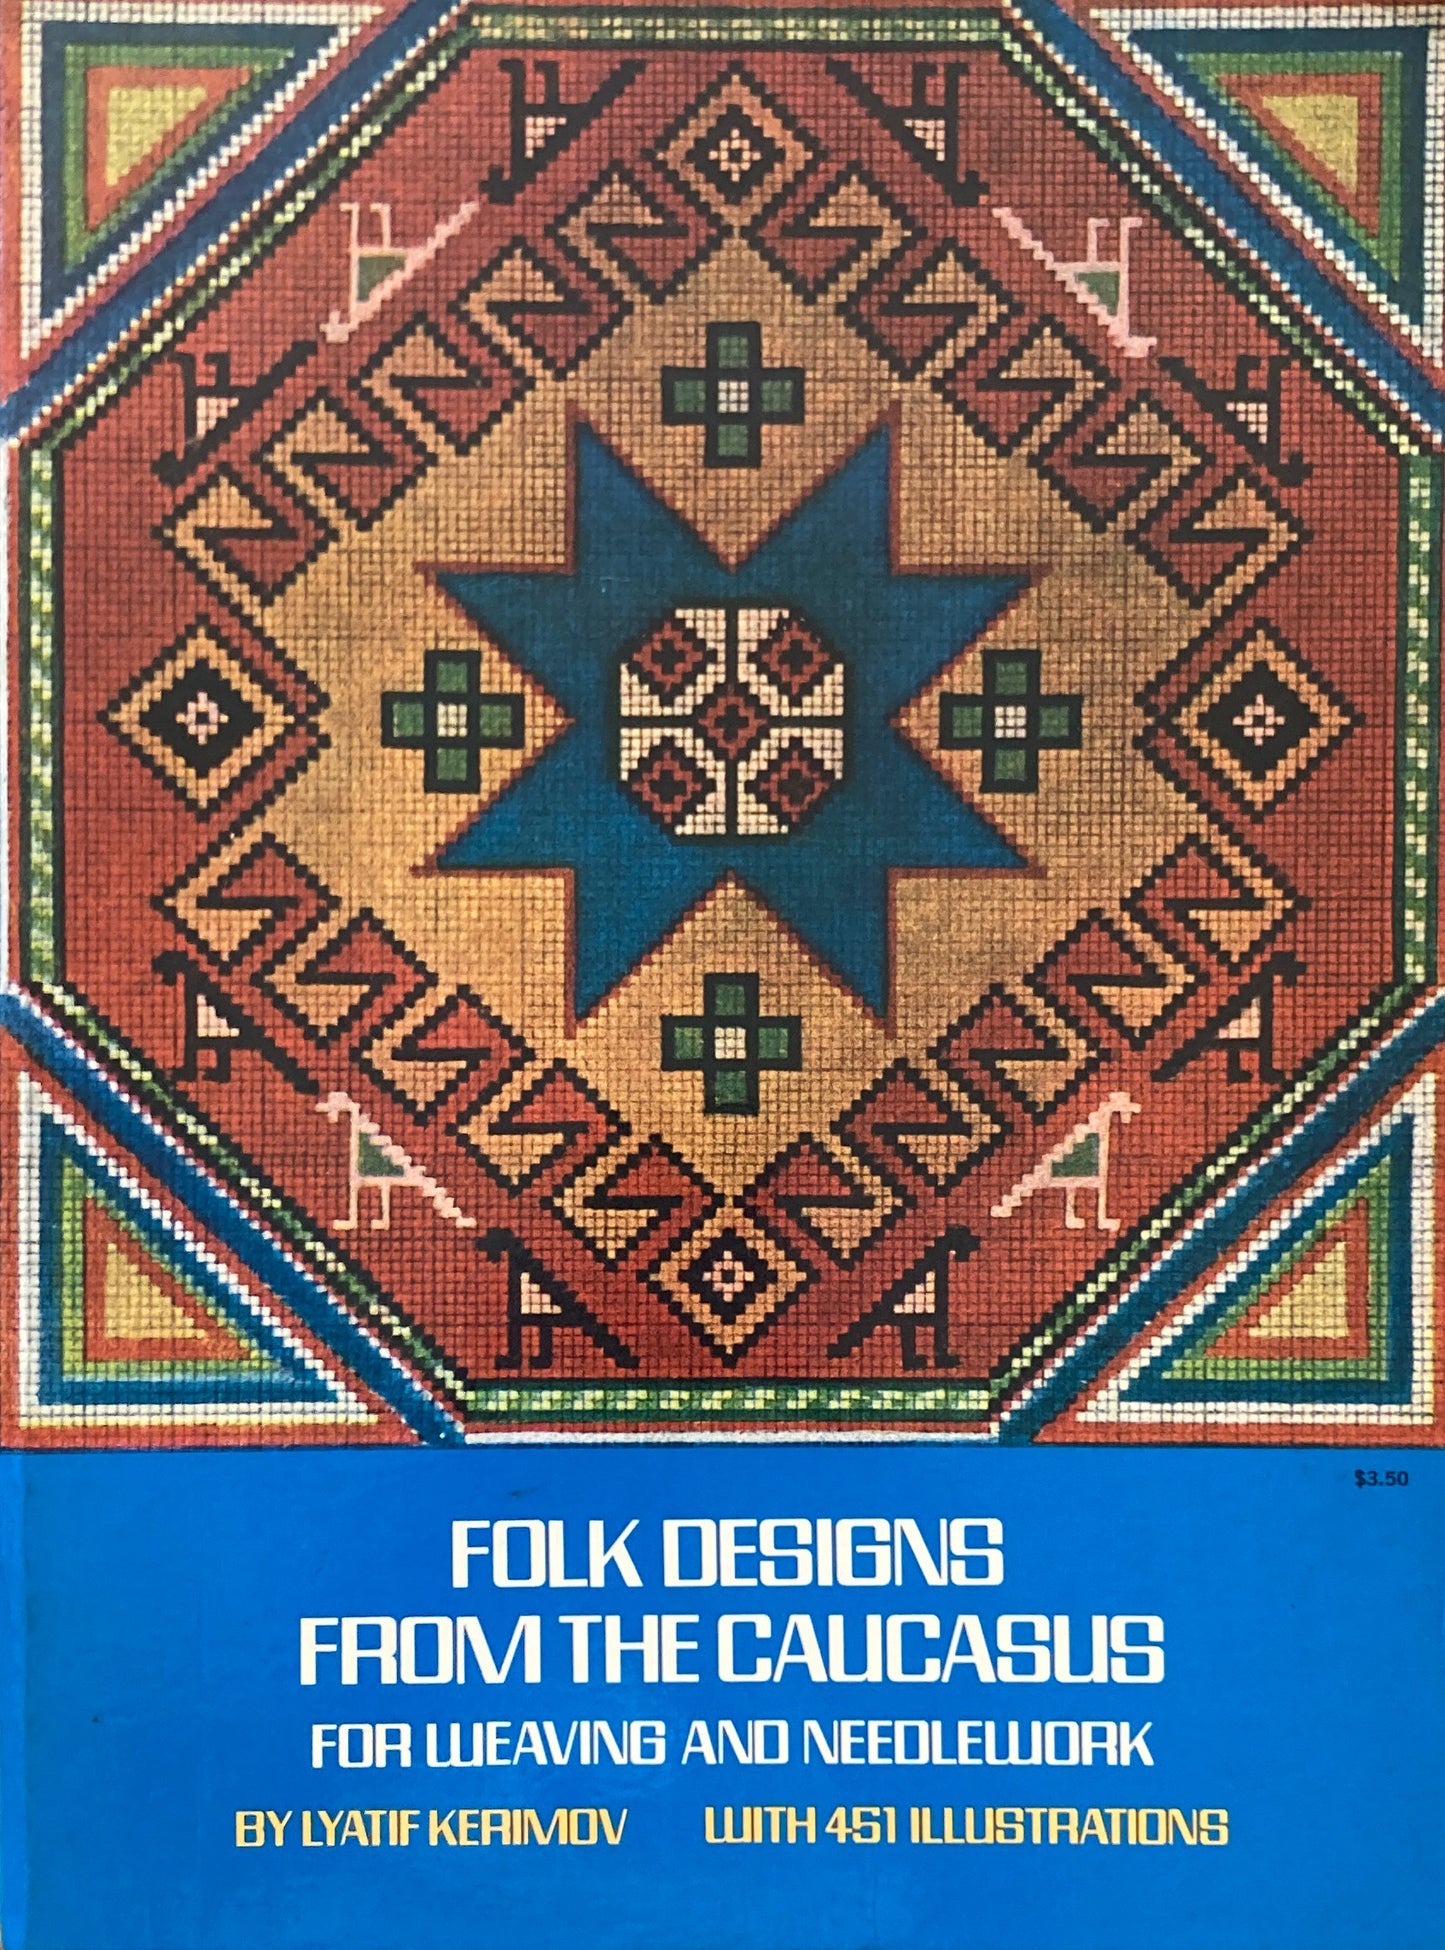 Folk Designs from the Caucasus for Weaving and Needlework　Lyatif Kerimov　Dover